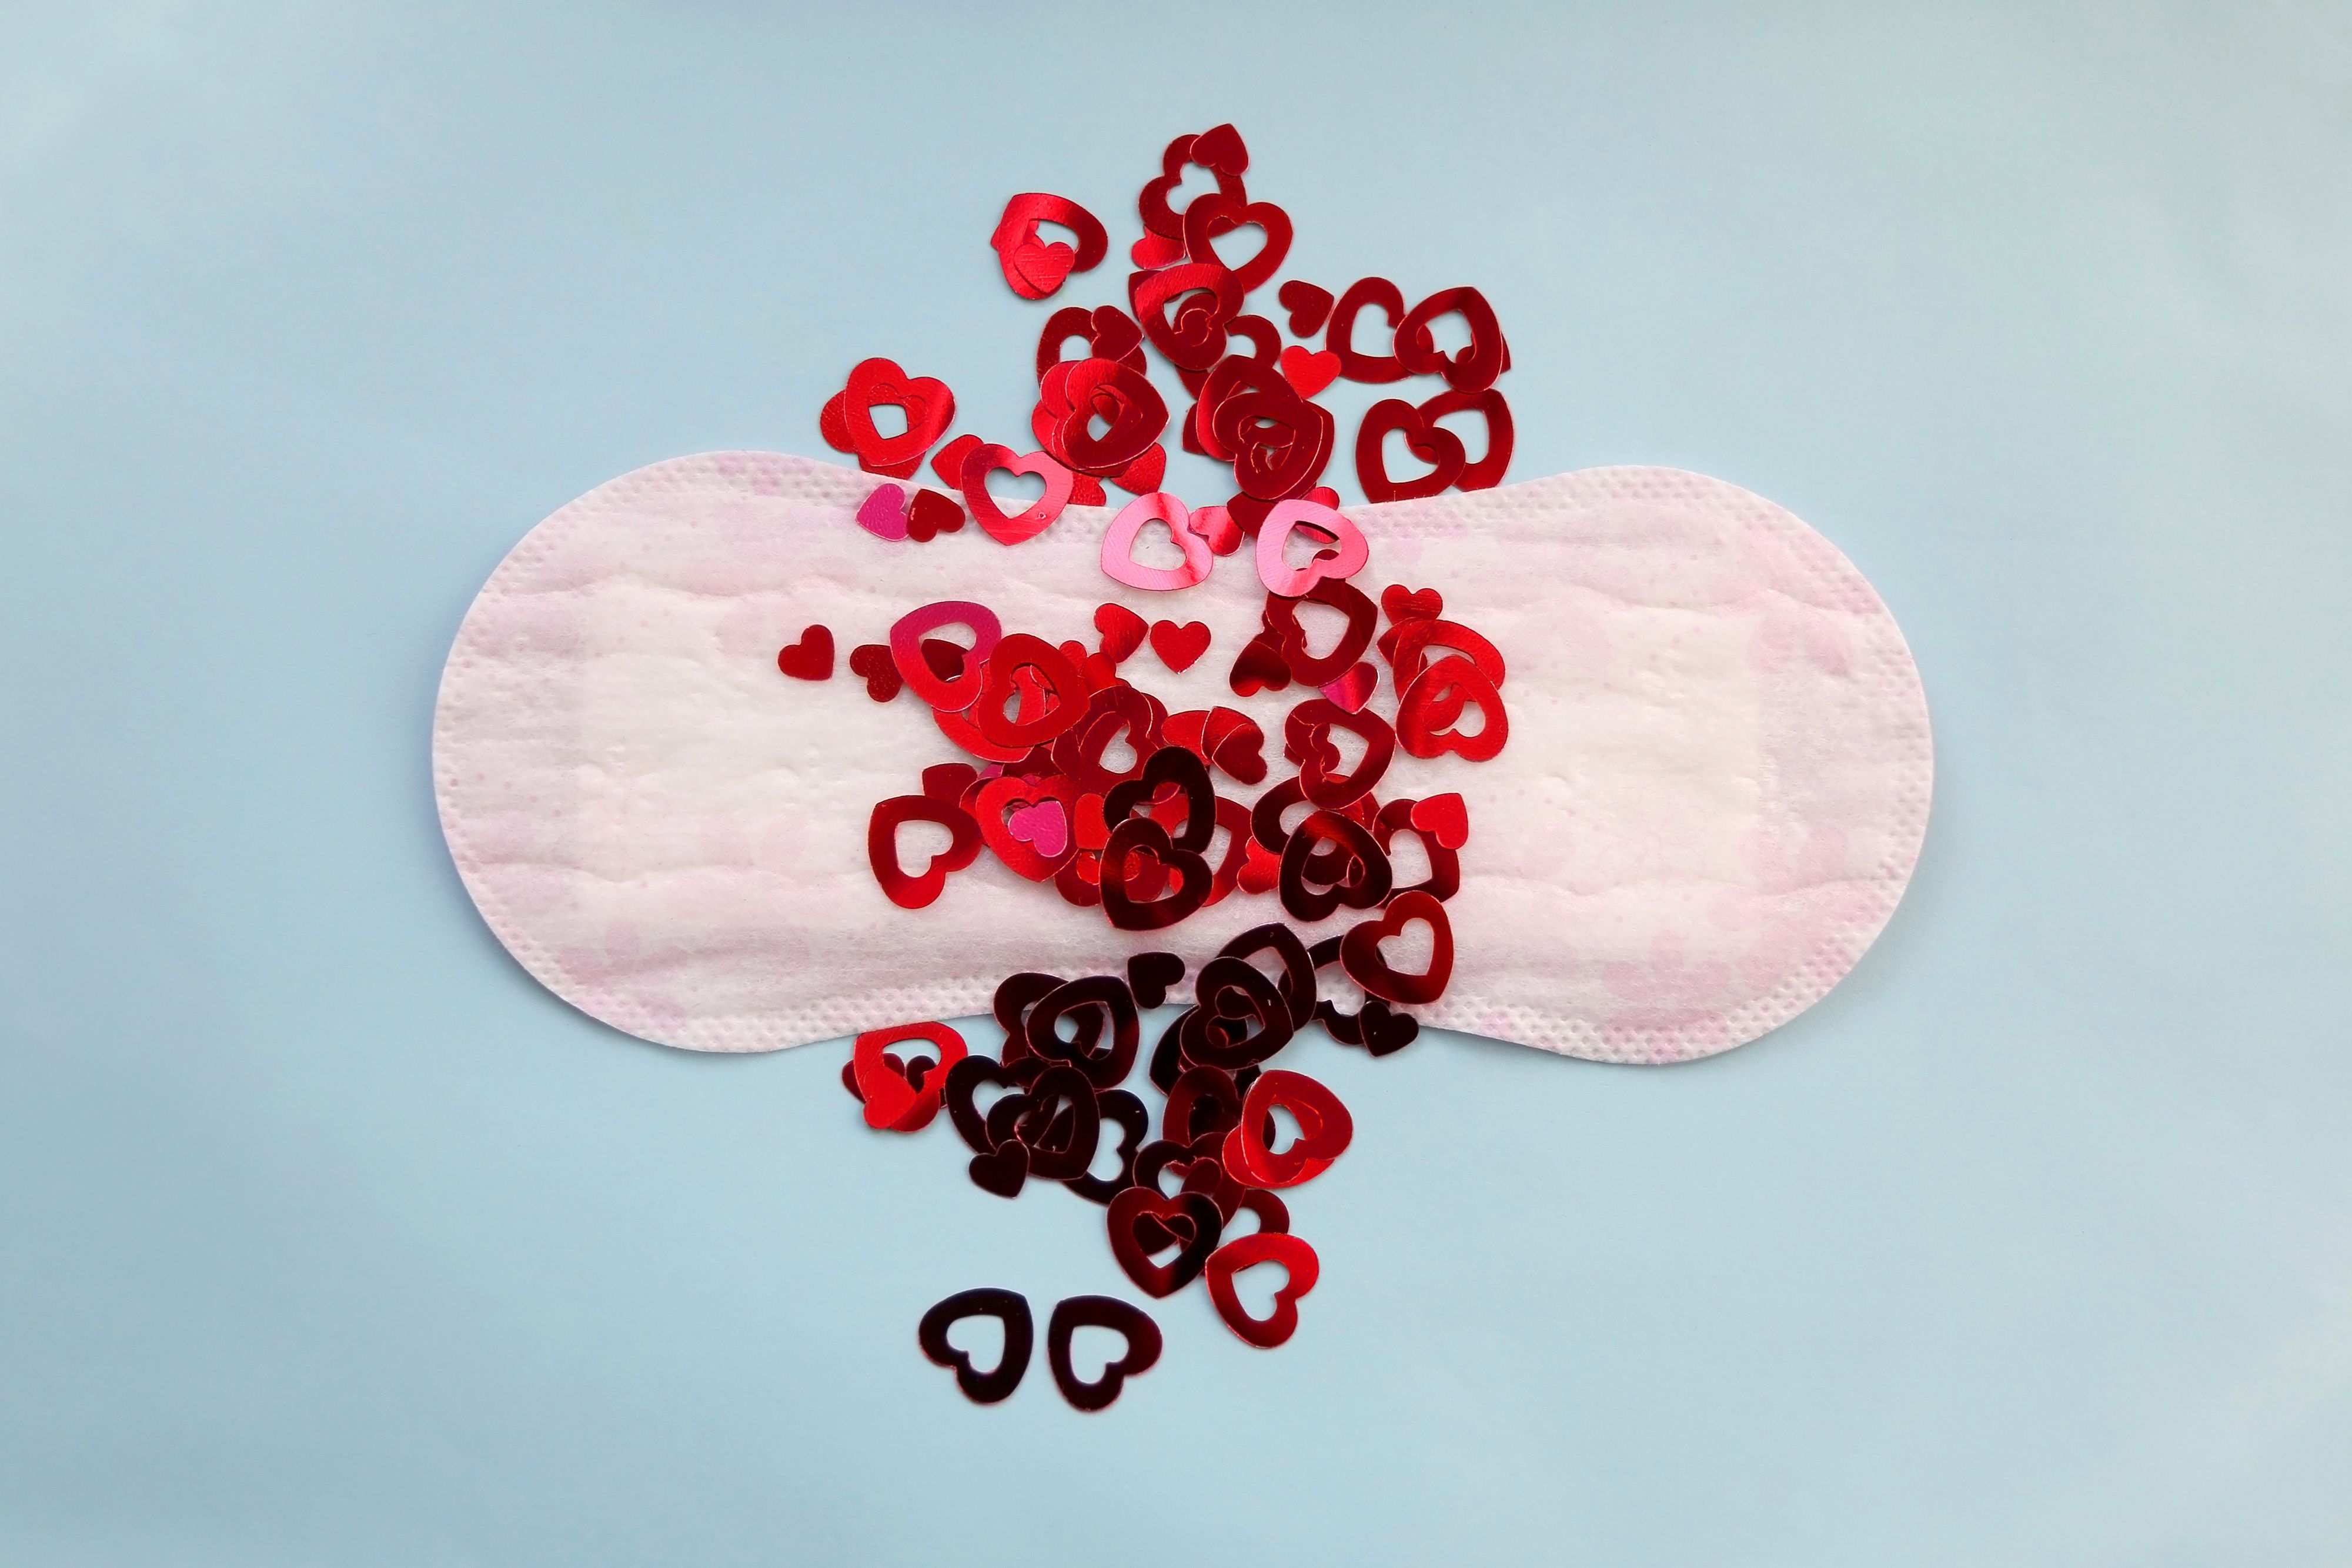 Period Blood Clots: Here's What You Need To Know!